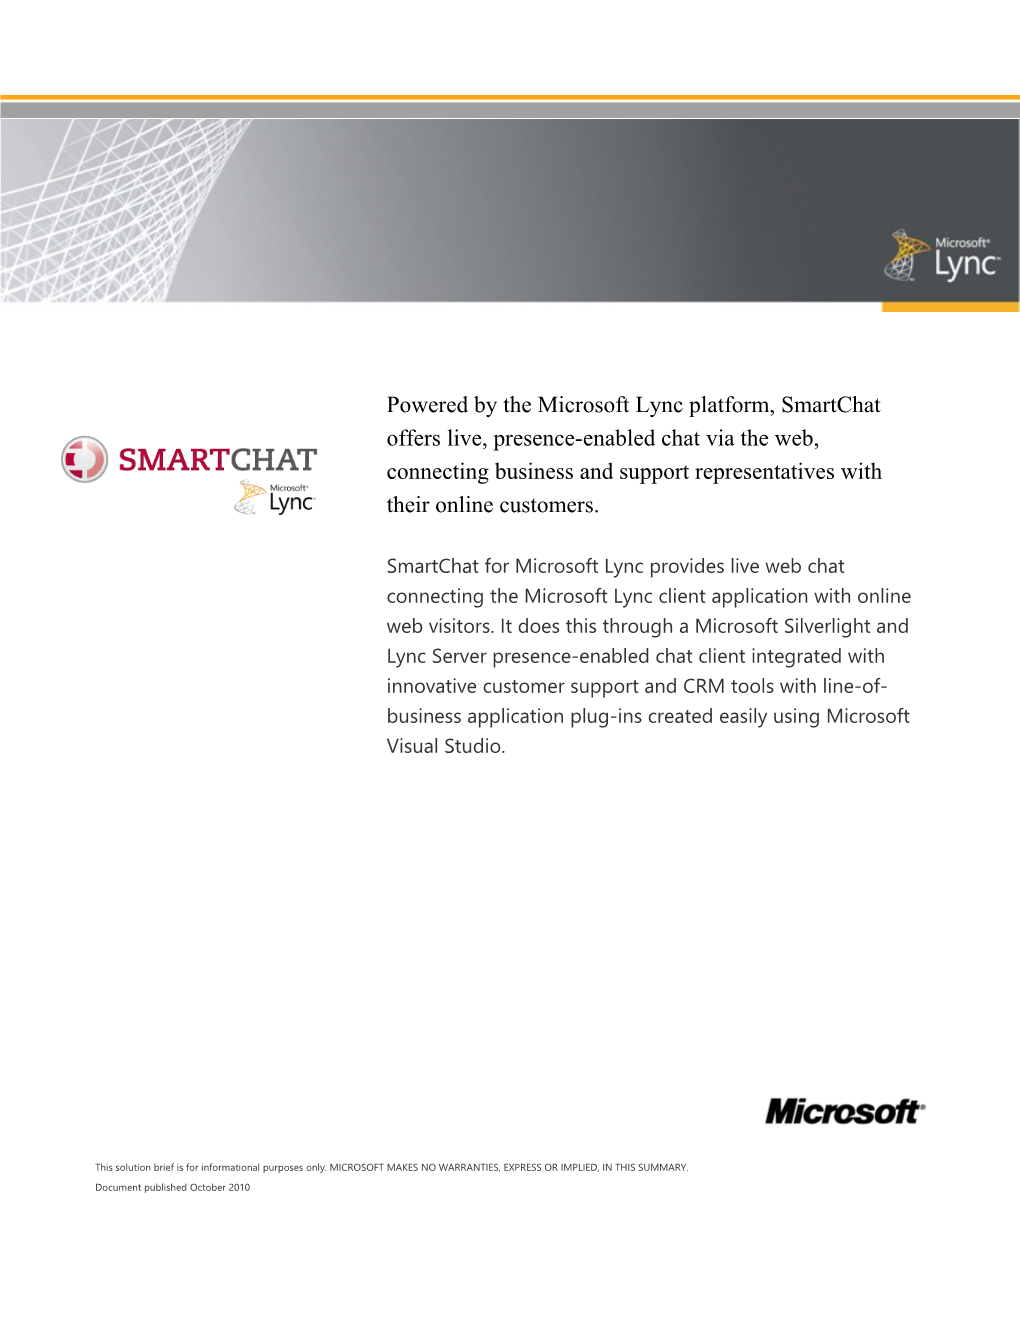 Powered by the Microsoft Lync Platform, Smartchat Offers Live, Presence-Enabled Chat Via